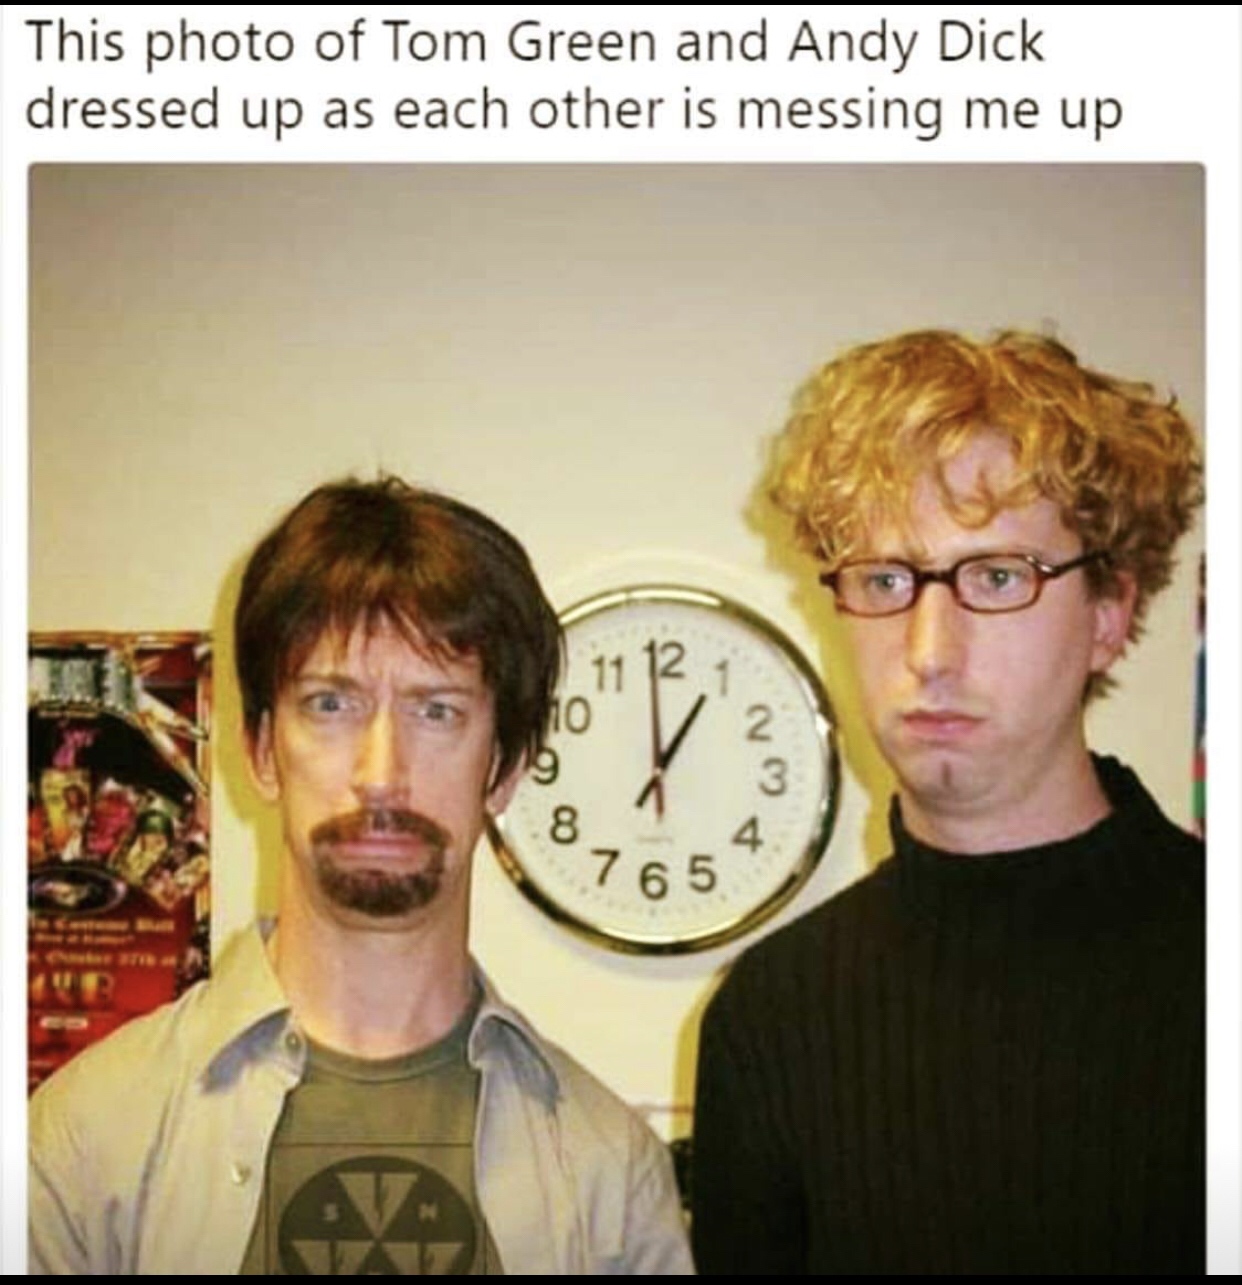 tom green and andy dick dressed up - This photo of Tom Green and Andy Dick dressed up as each other is messing me up